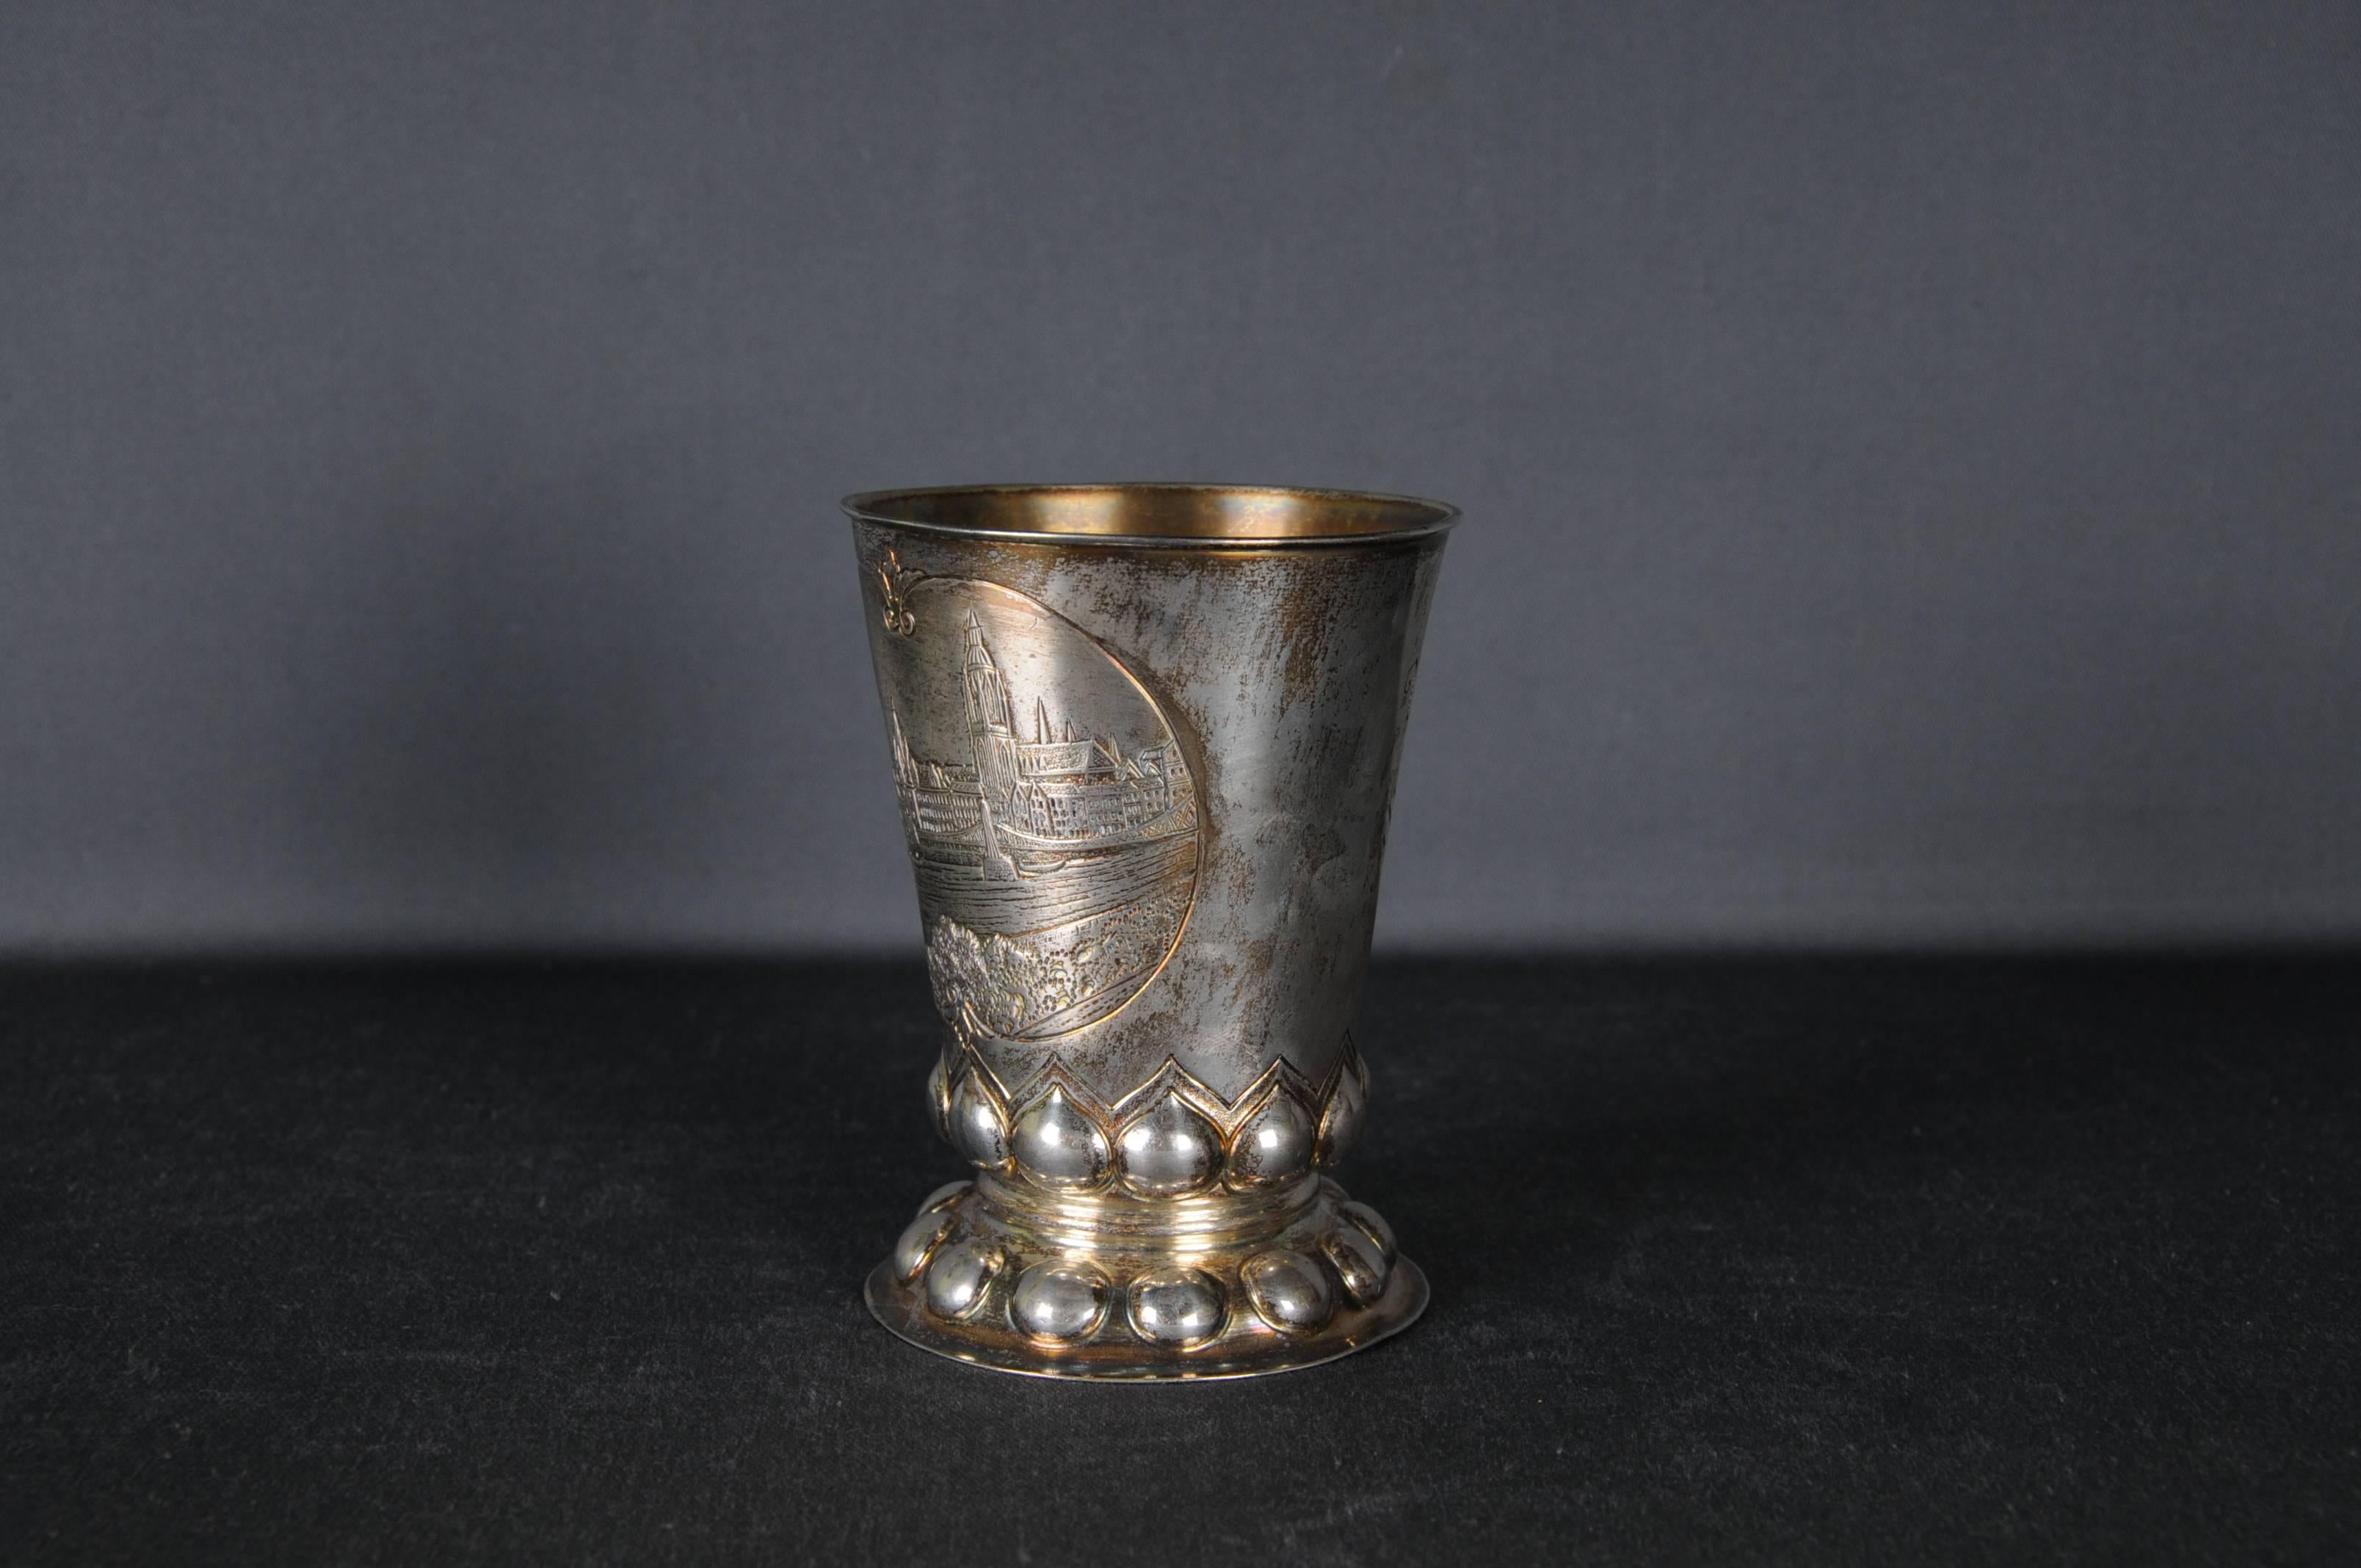 Antique Silver Footcup 800er Silver Germany Cup, gilded, German City View  For Sale 2